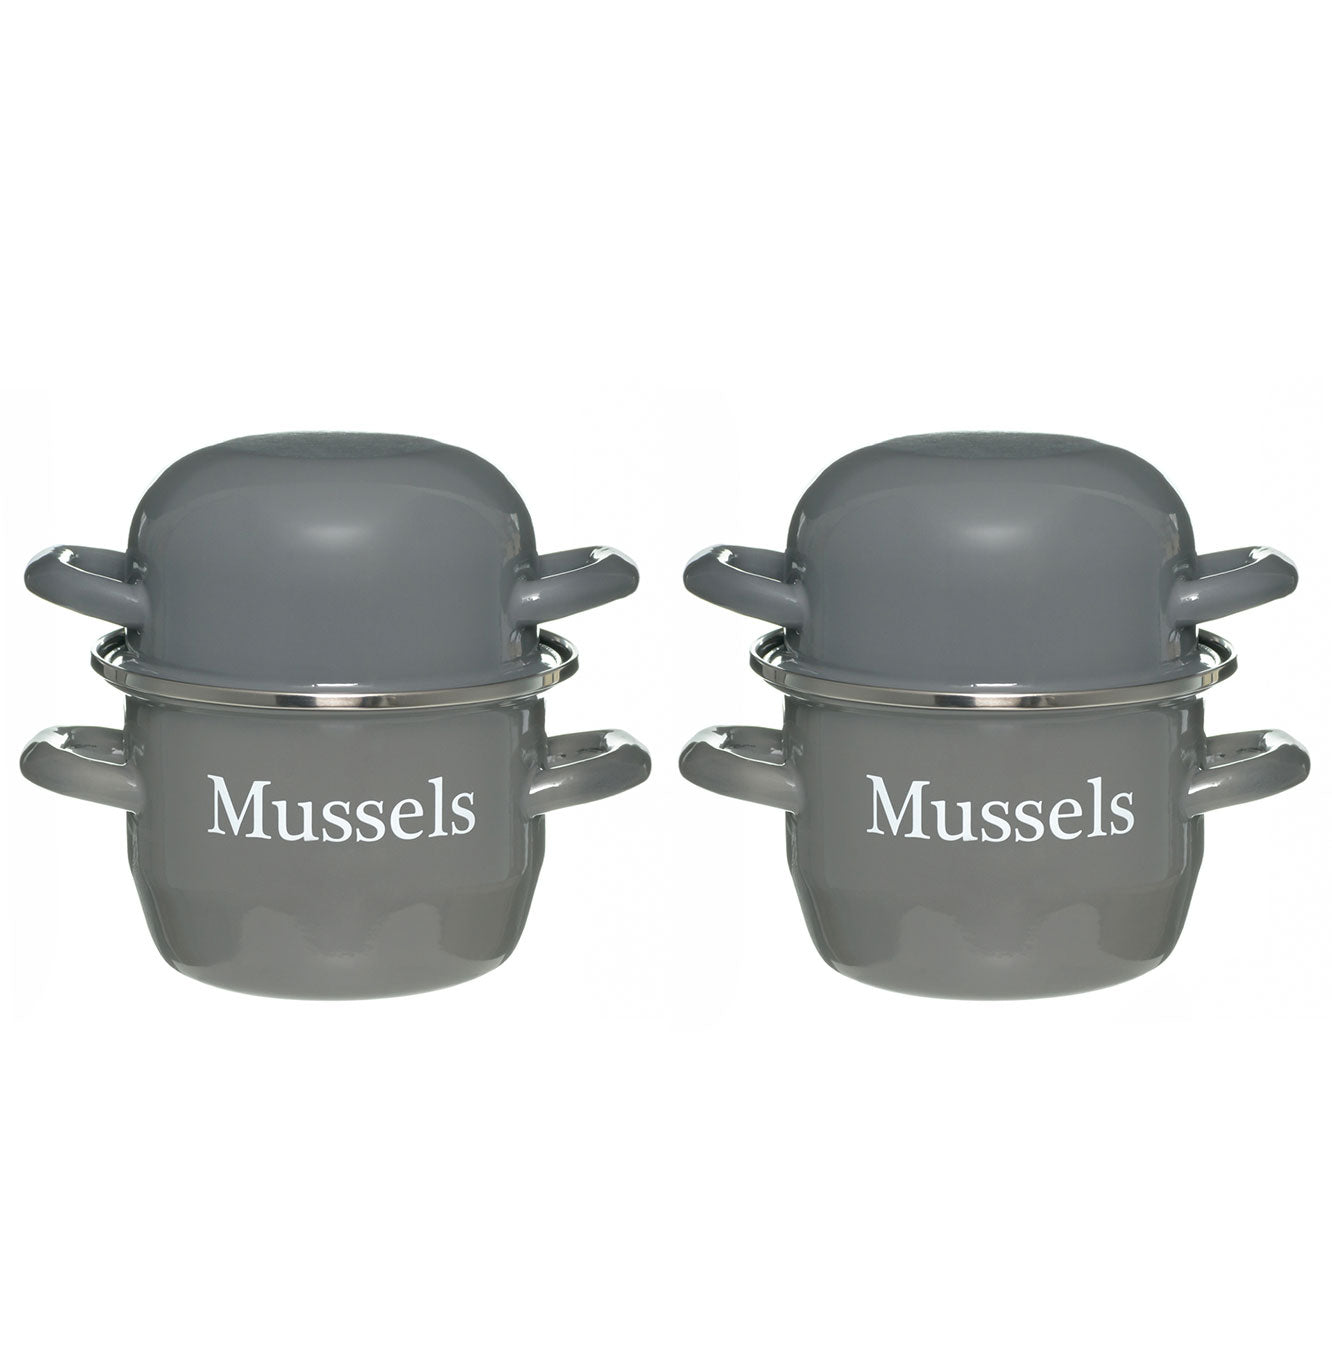 Grey Enamelled Mussel Pots from China Blue